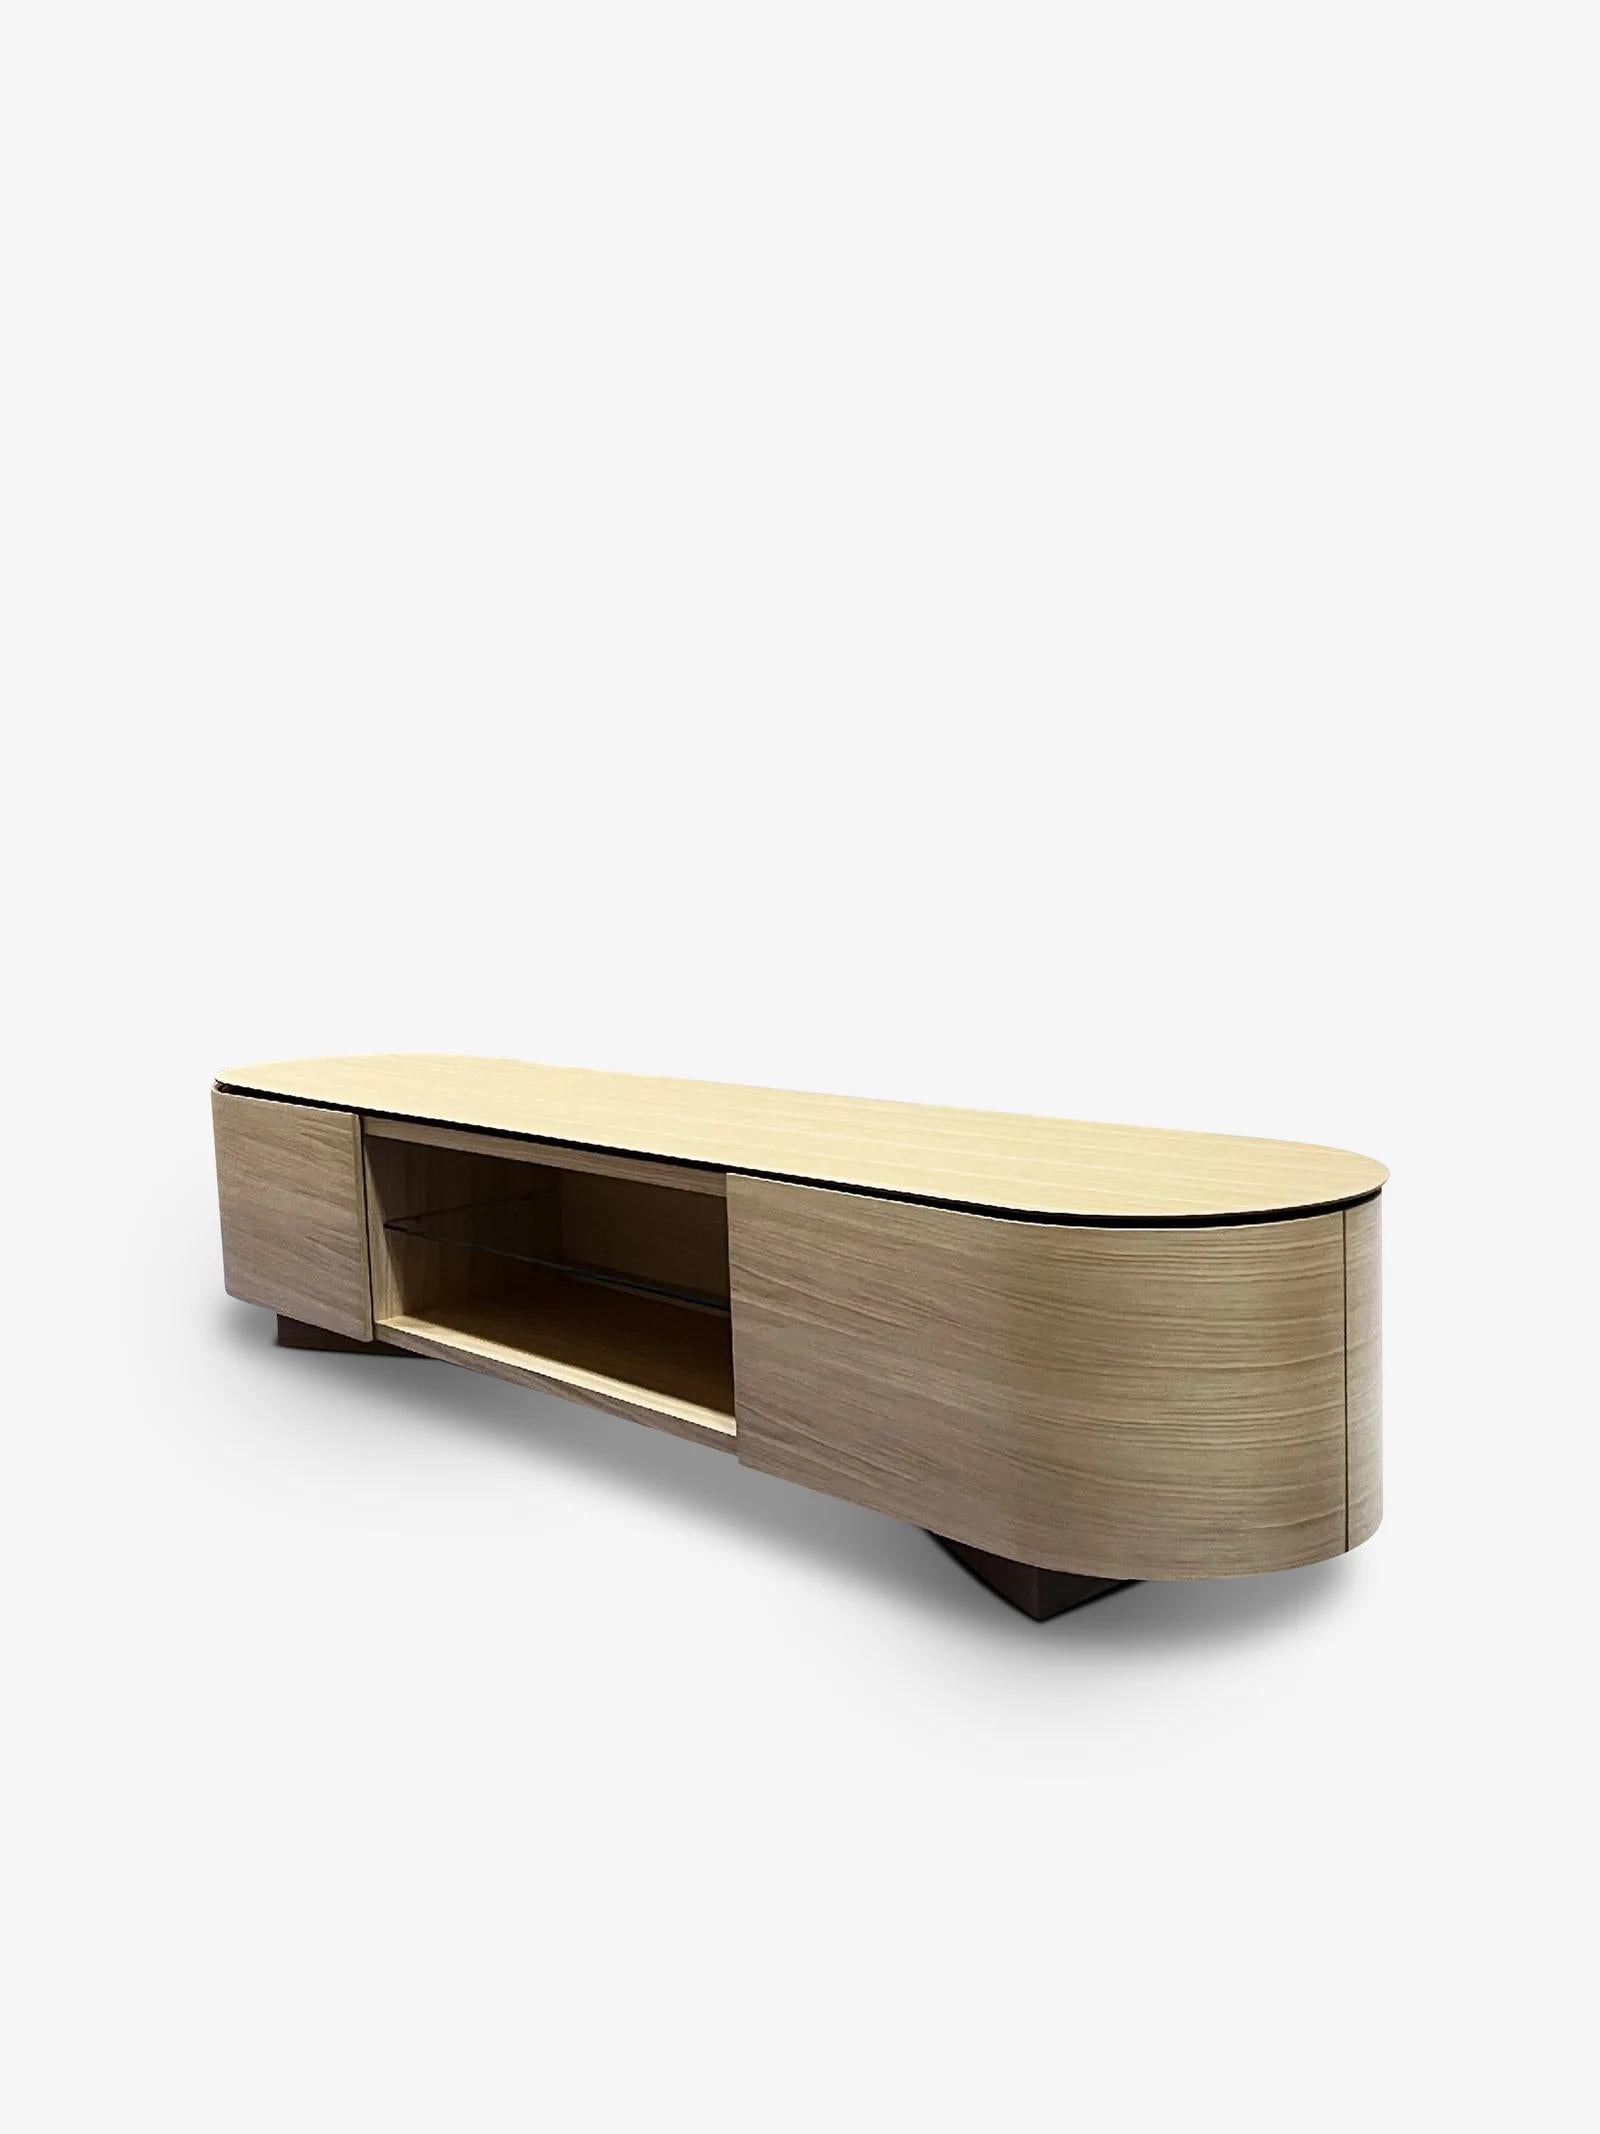 Designed by Patricia Urquiola, Rondos is a design chest of drawers with soft, rounded contours that curve gracefully around the sides, lending an informal and very inviting air to the living room and the bedroom.

Patricia Urquiola was born in